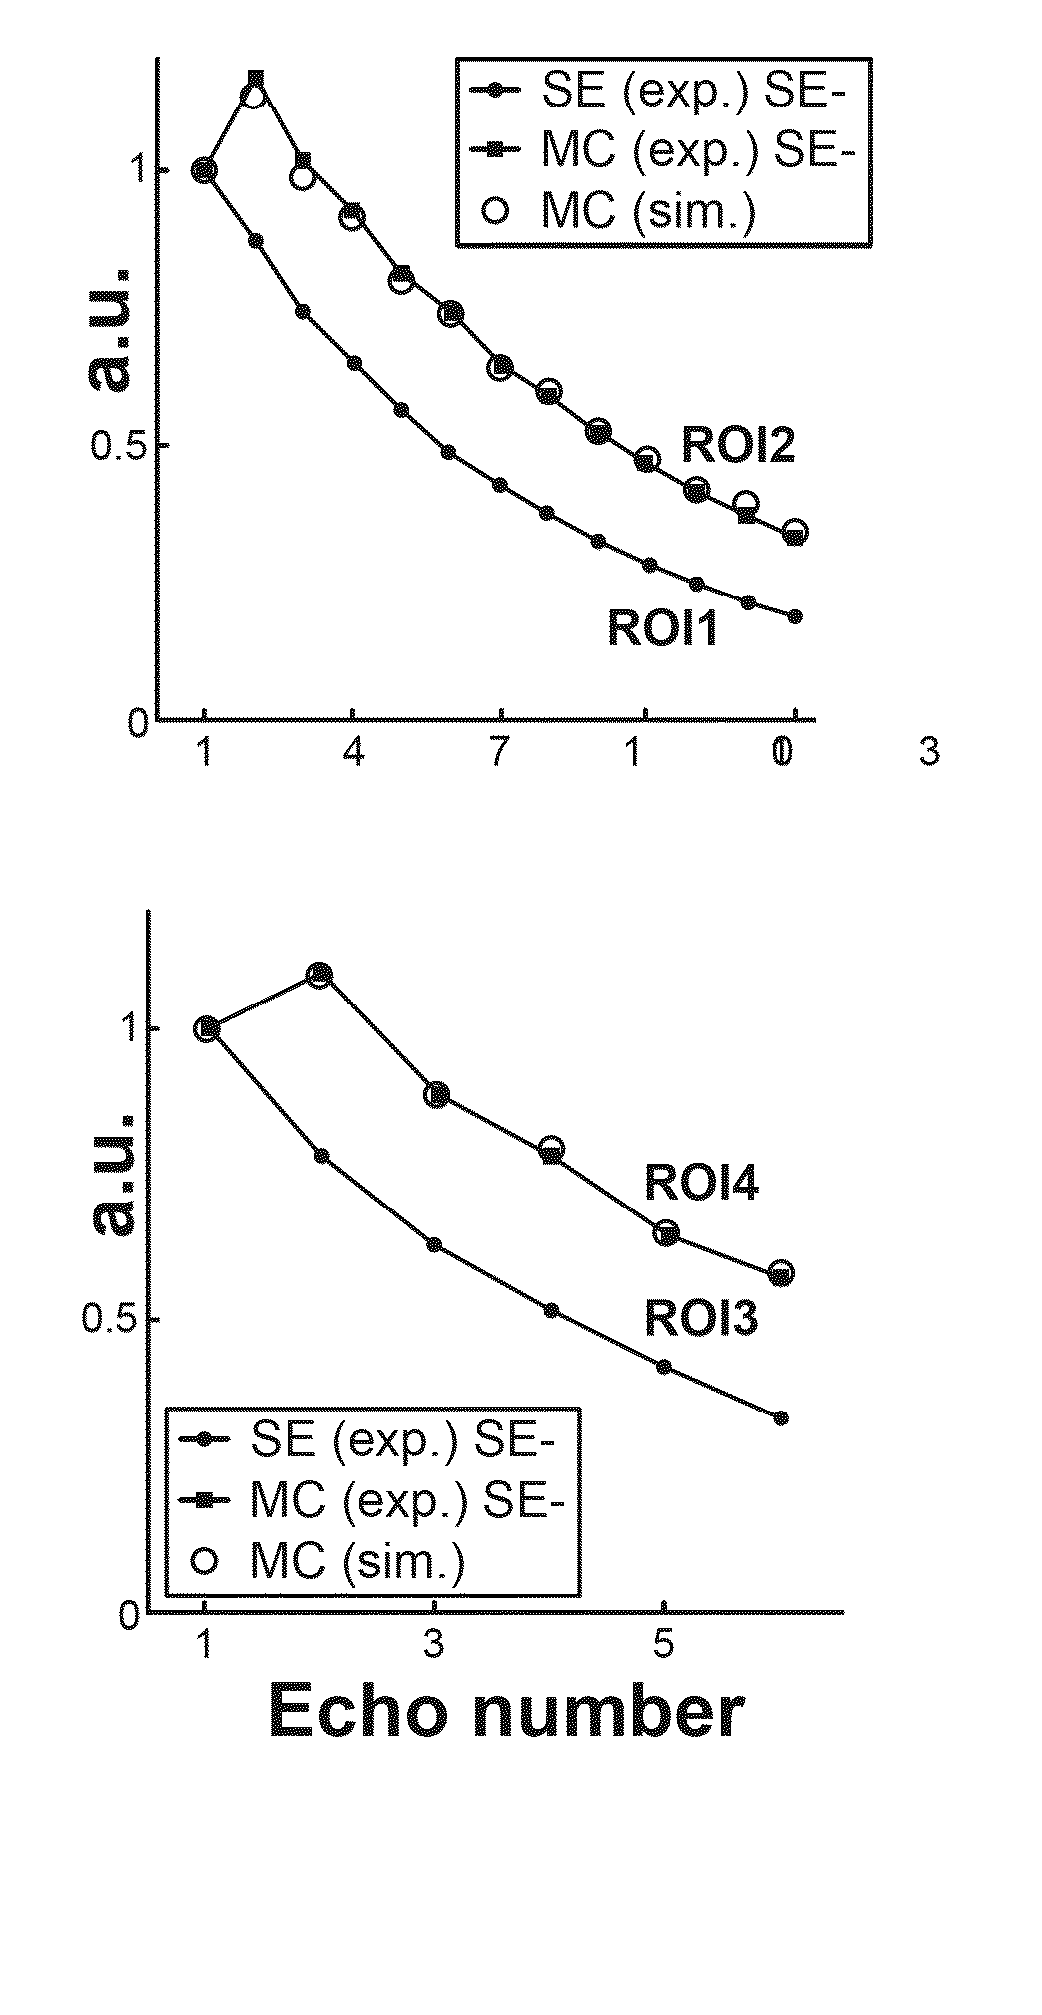 Method and device for accurate quantification of t2 relaxation times based on fast spin-echo nmr sequences